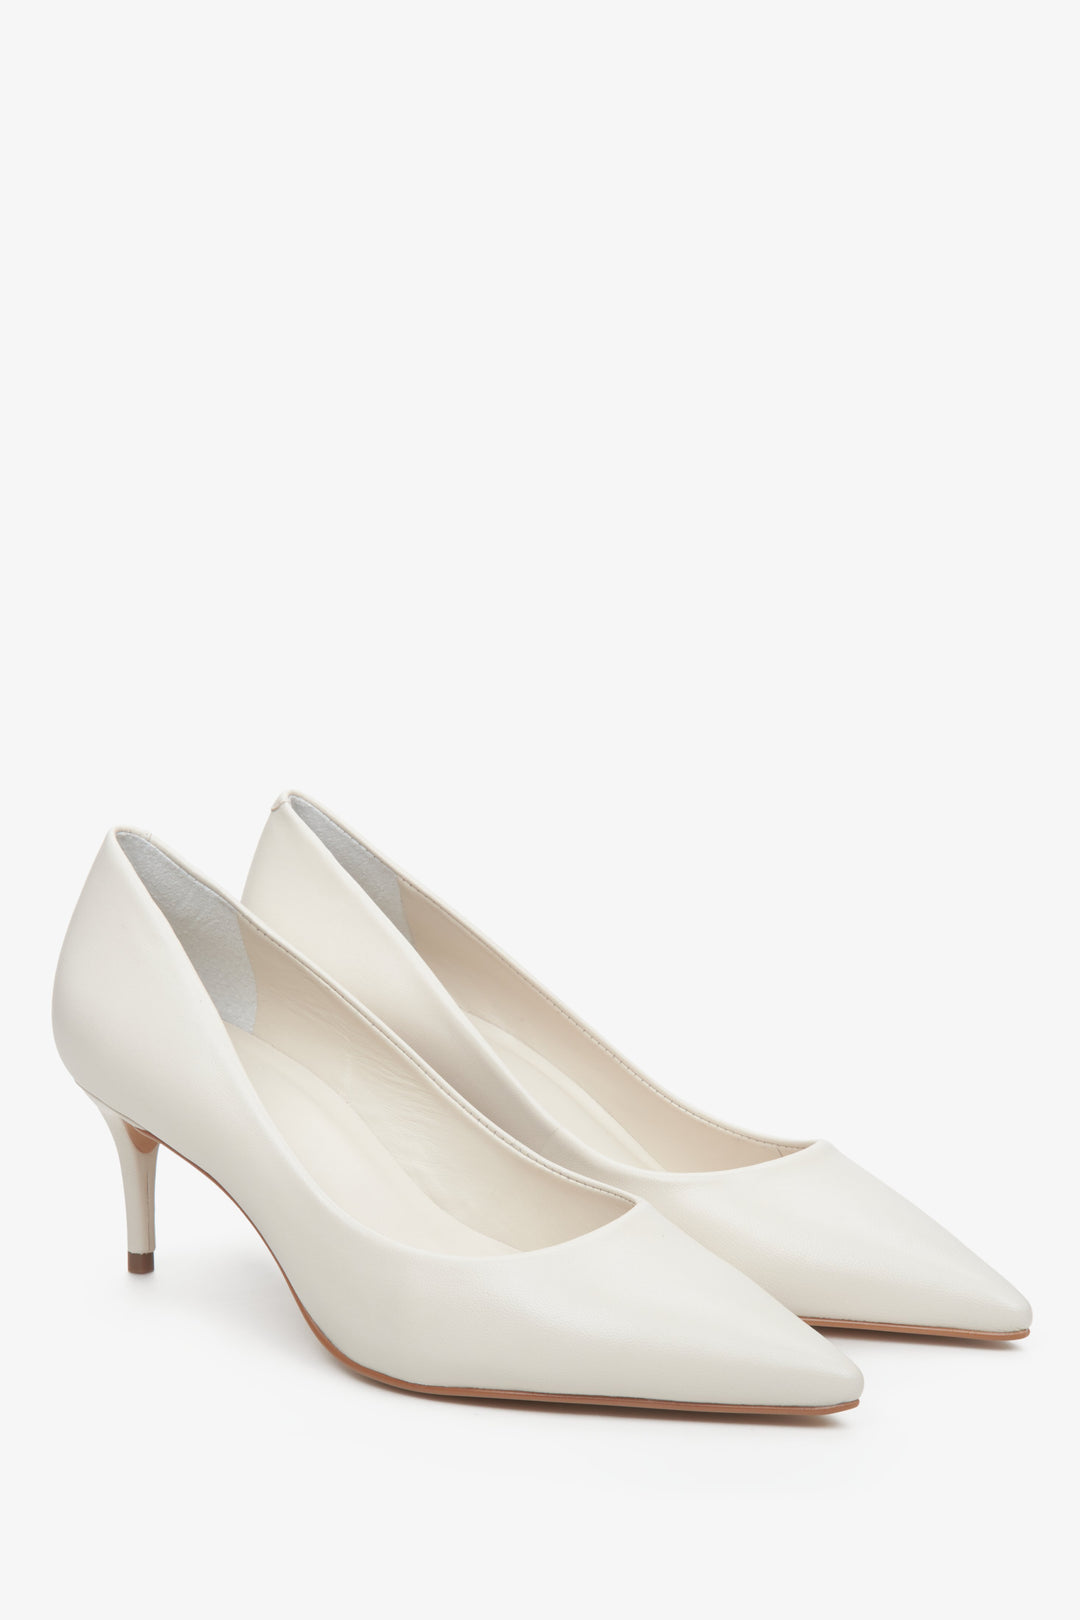 Leather women's pumps in beige colour by Estro - close-up of the shoe's toe.